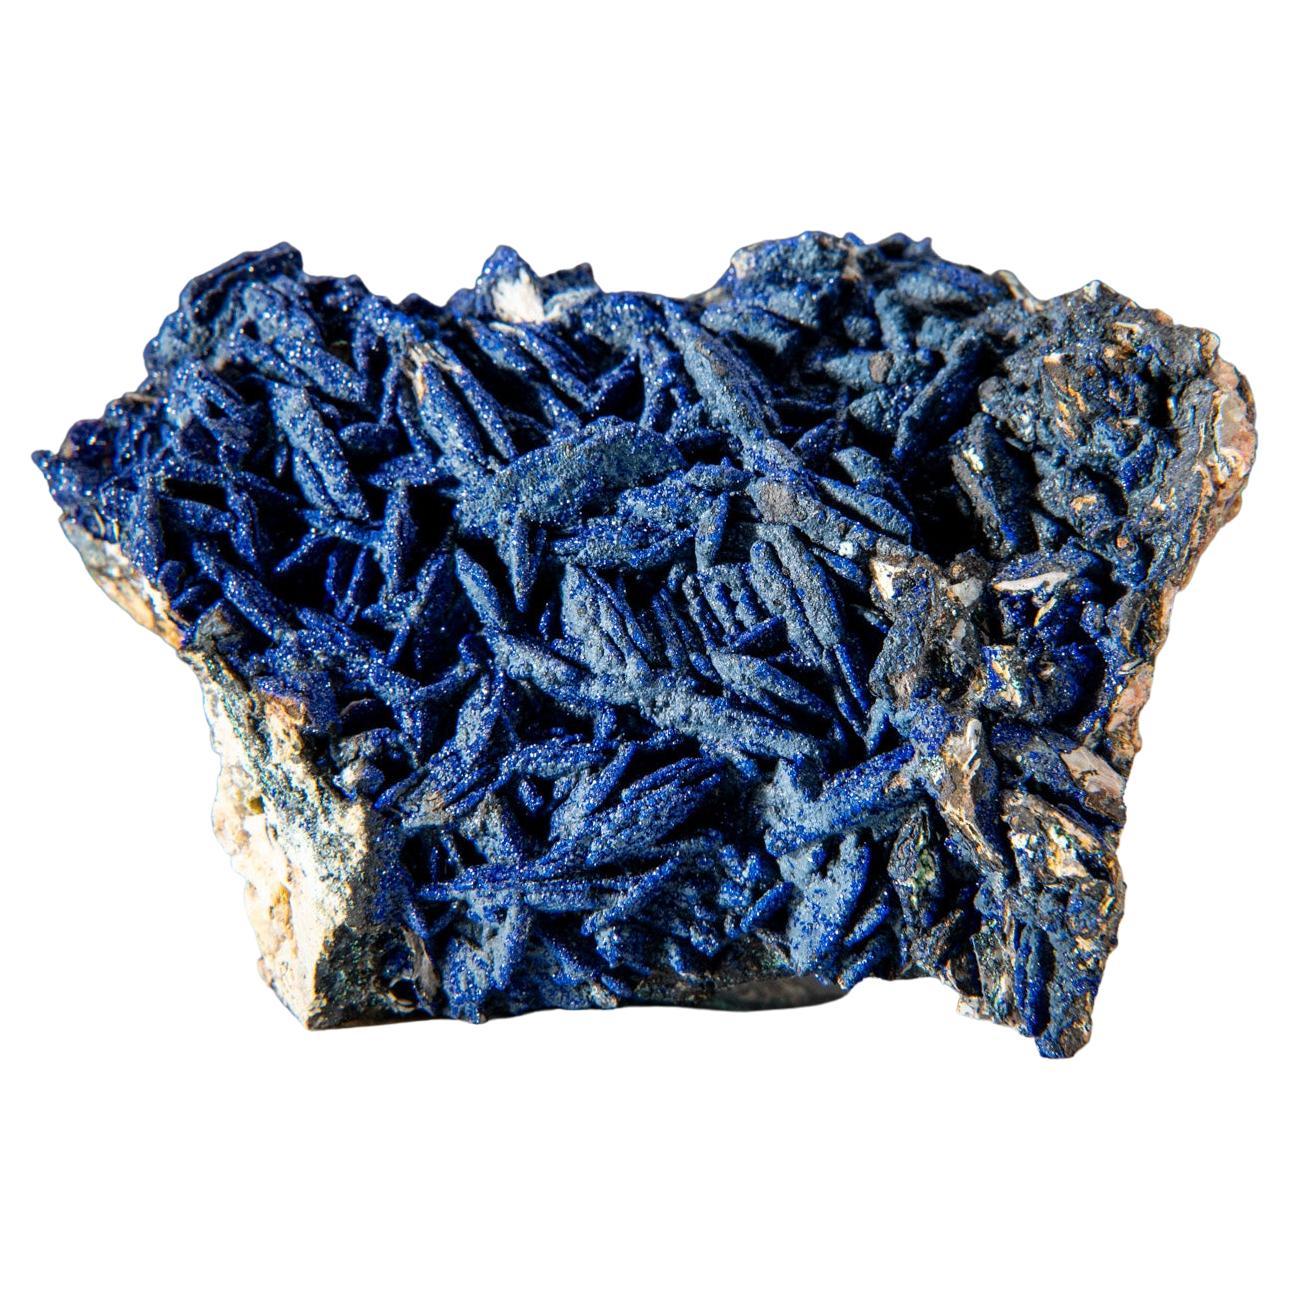 Azurite and Malachite from Ahouli Mines, Midelt Province, Morocco